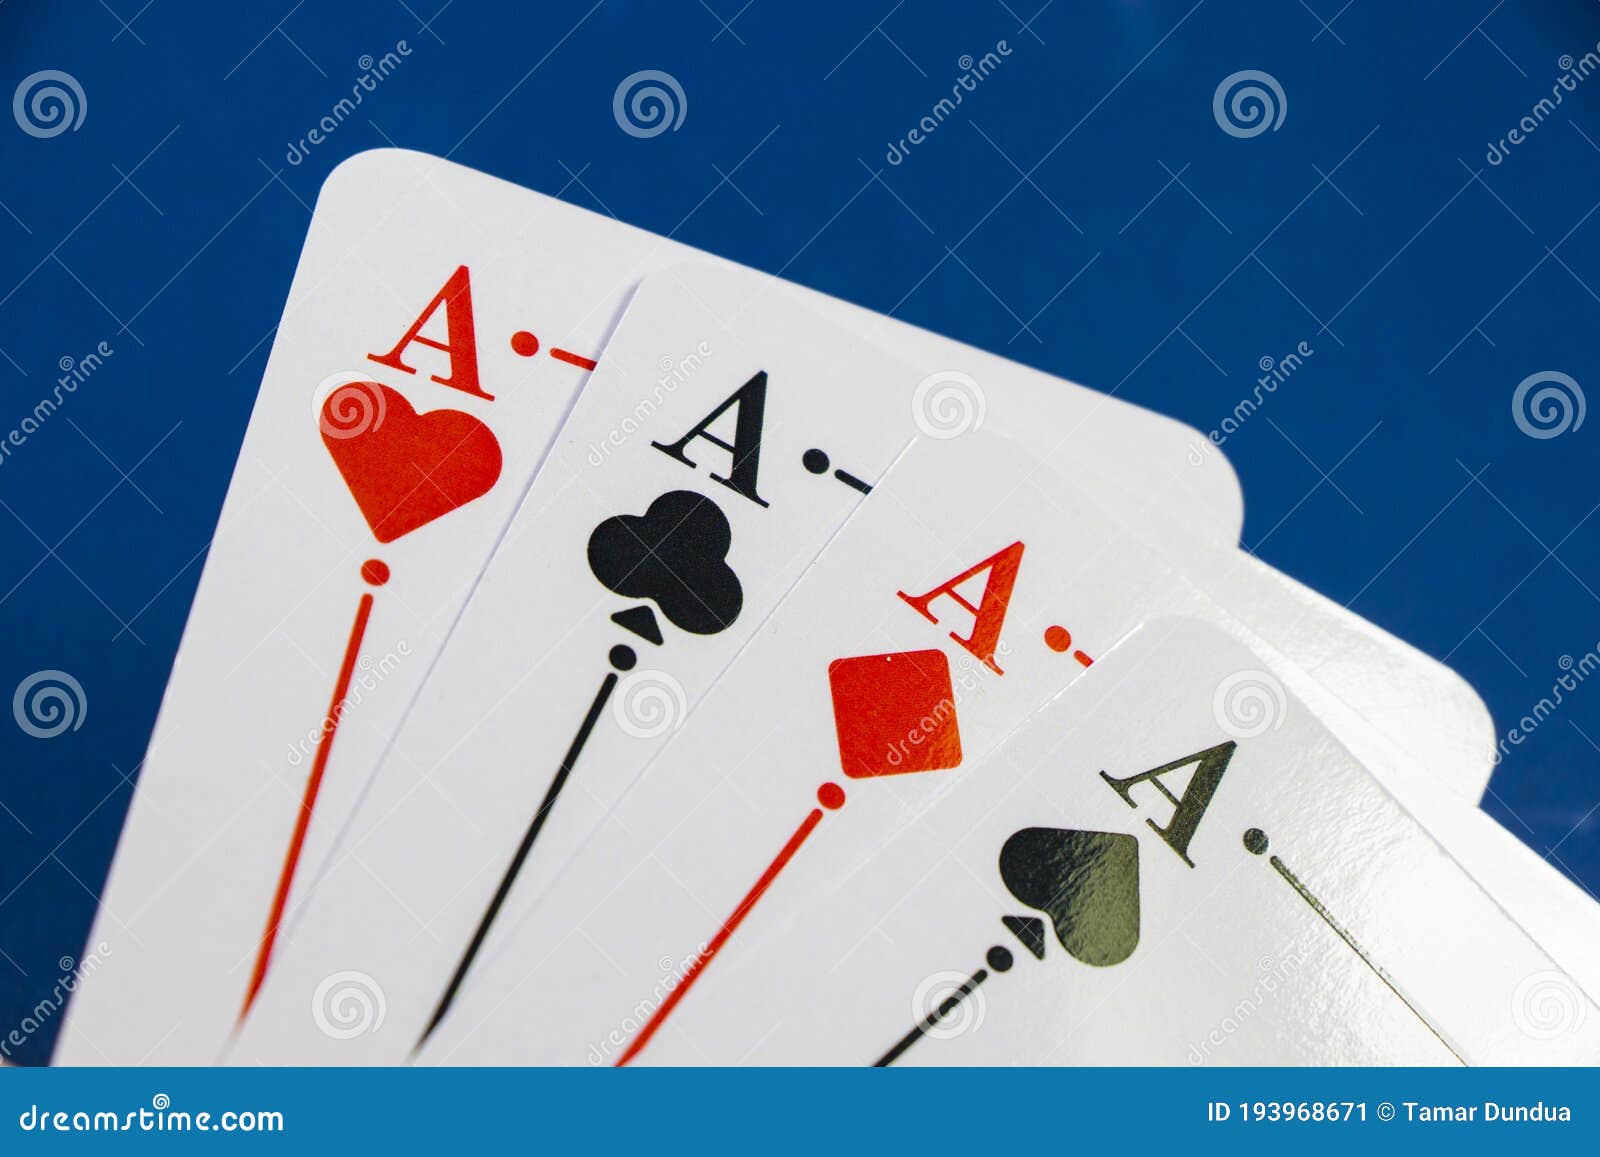 Four Aces And Chips, Card Game, Cards On The Table. Poker ...